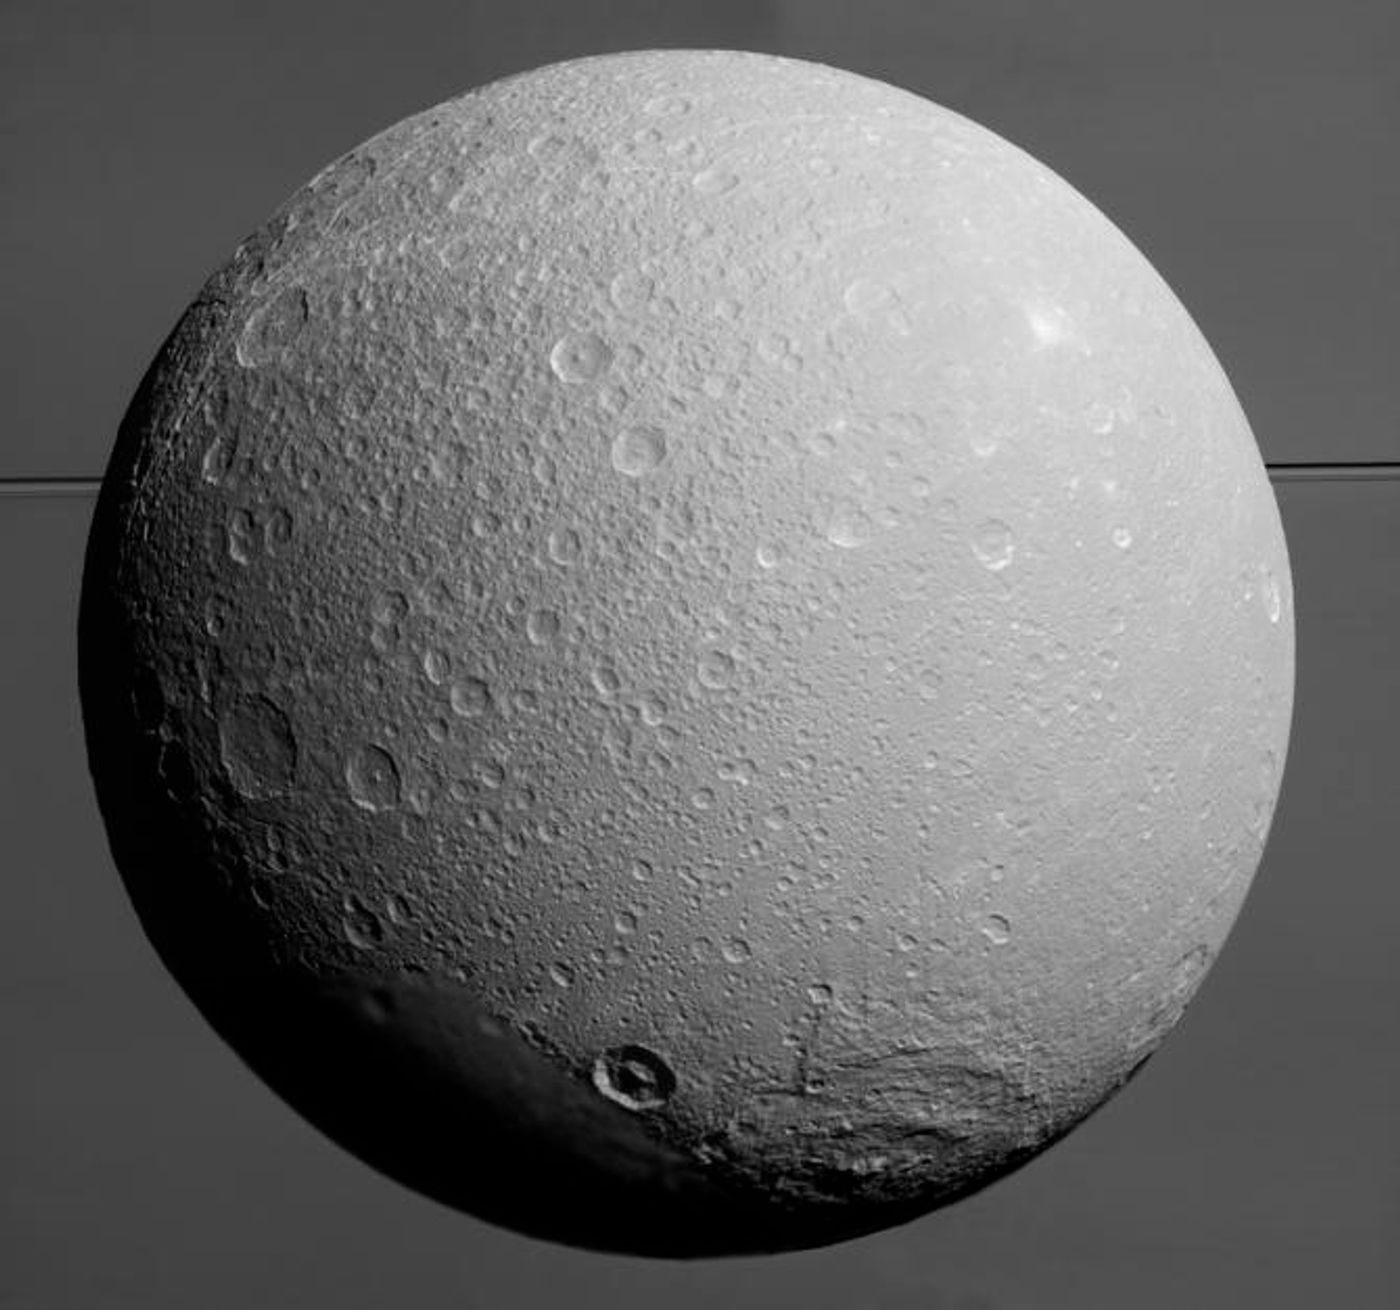 A close-up image of Saturn's moon Dione, as taken by NASA's Cassini spacecraft.